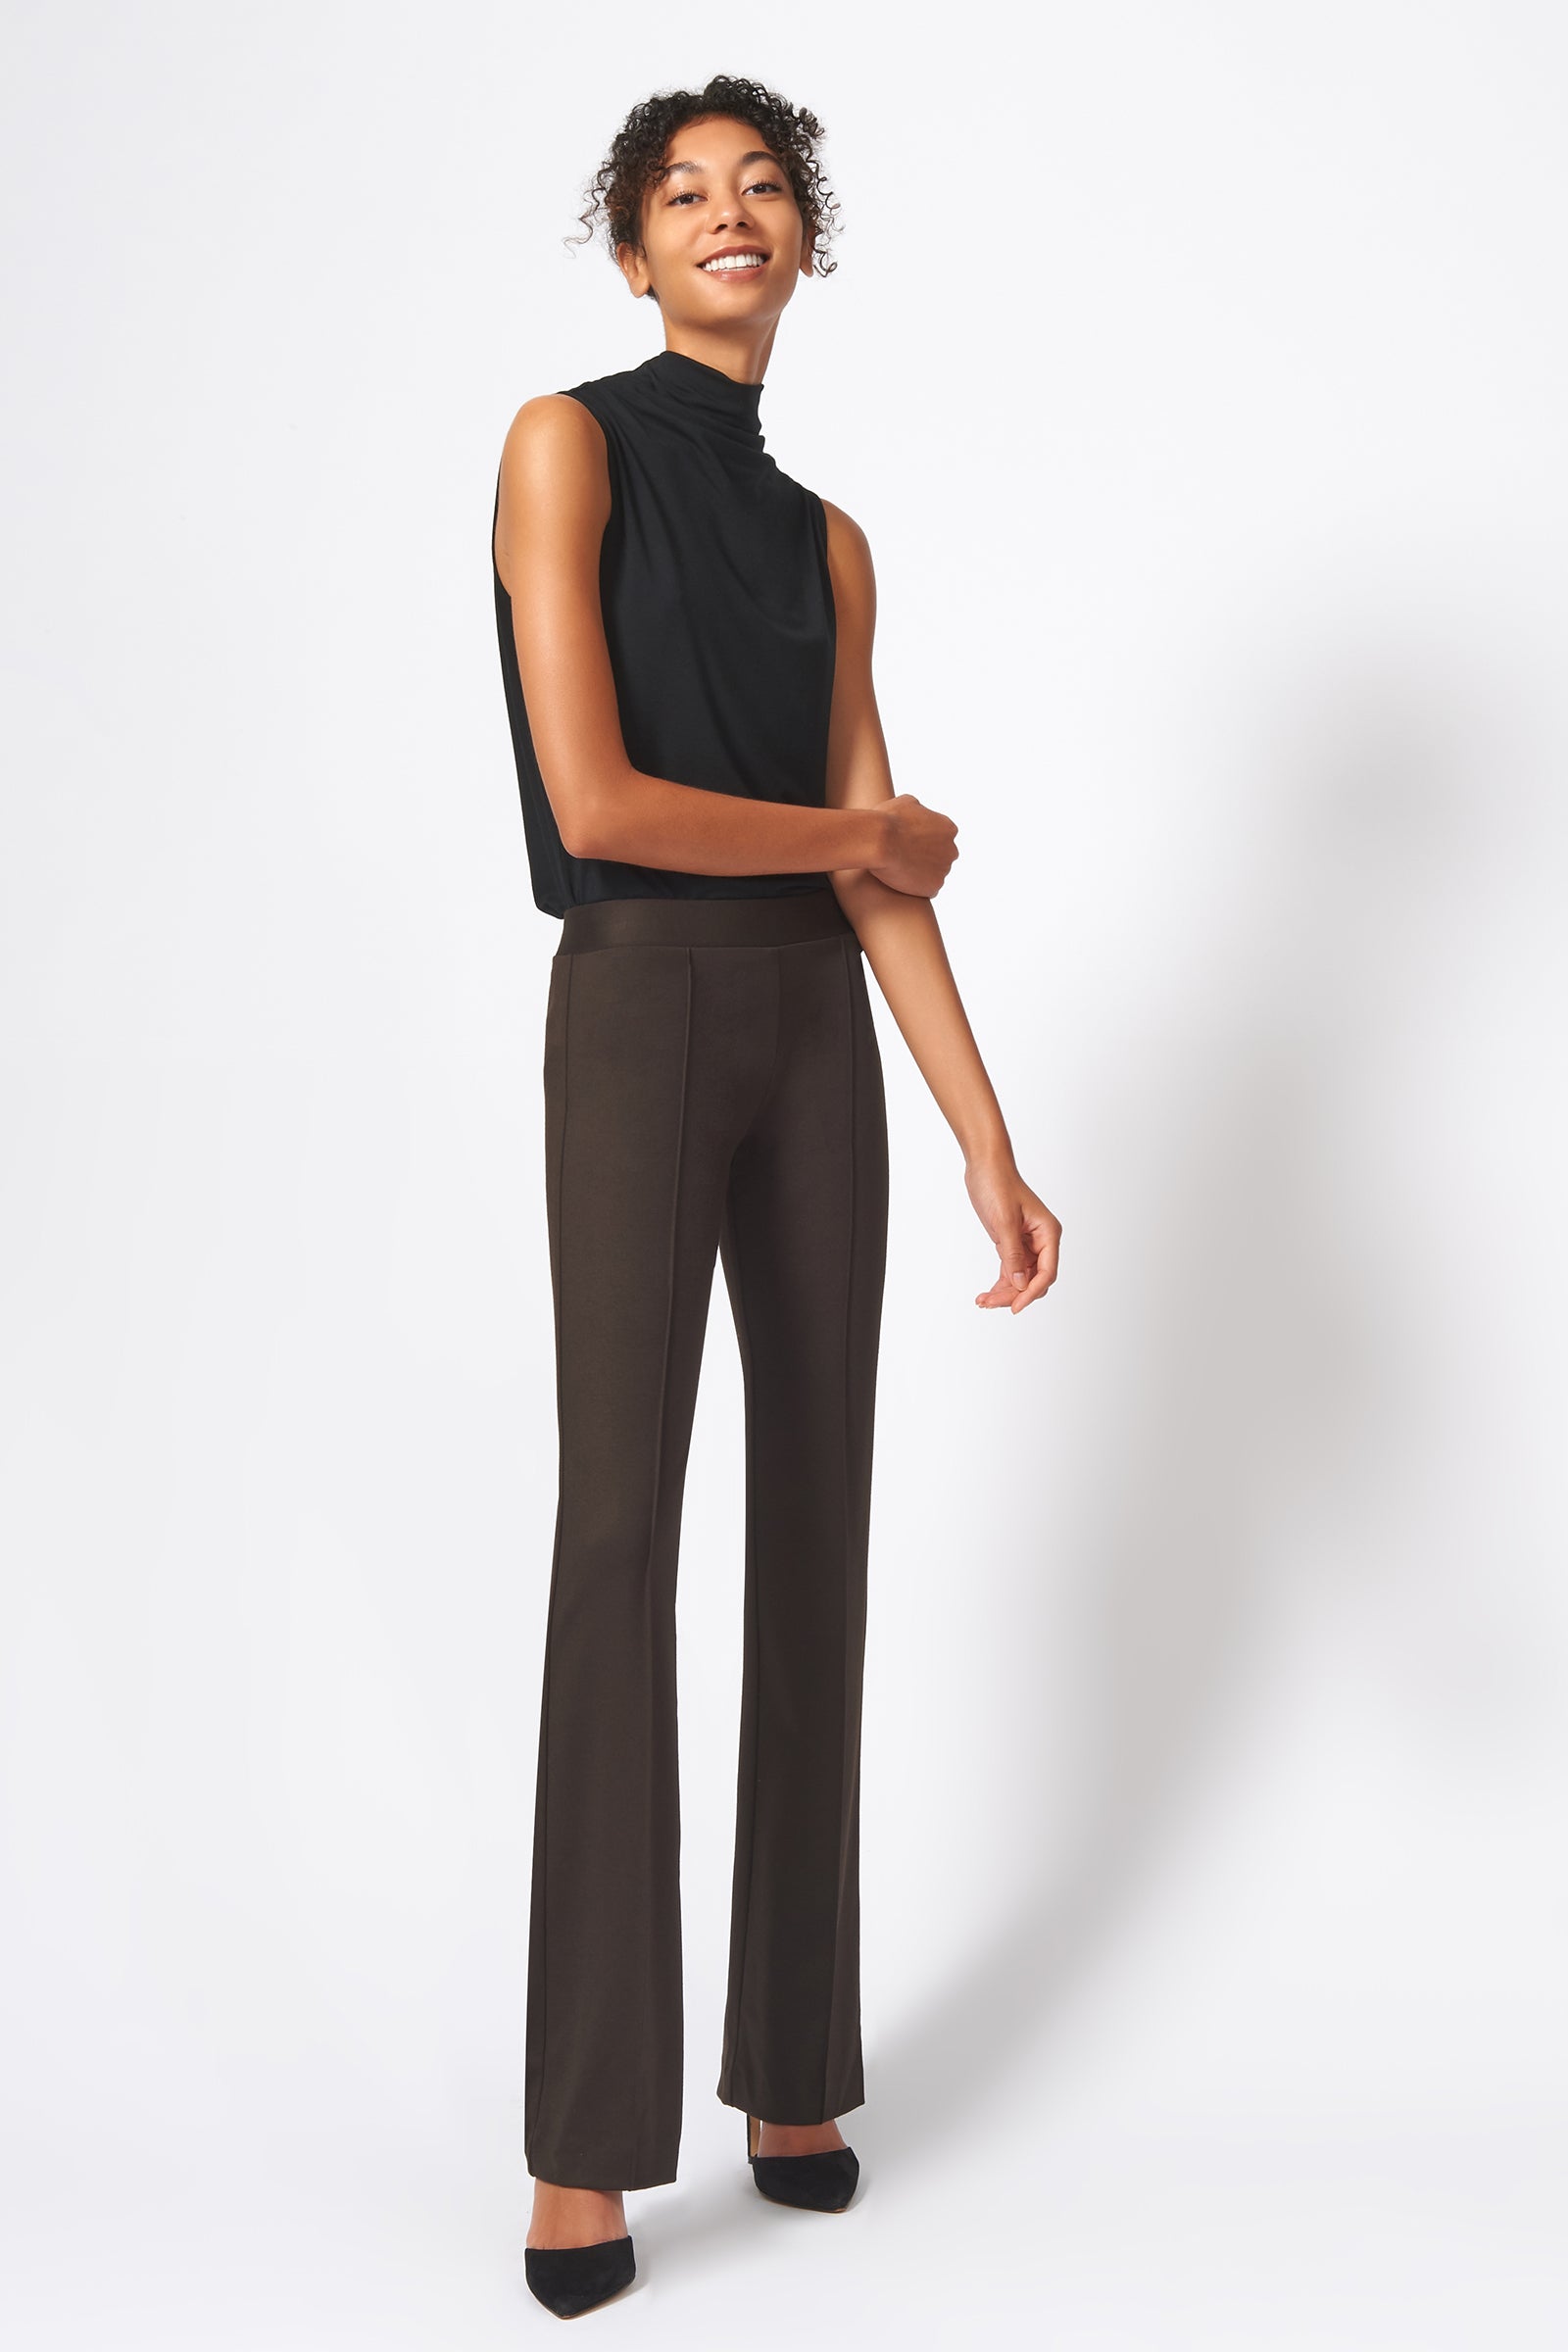 Kal Rieman Pintuck Ponte Column Pant in Espresso on Model Full Front View